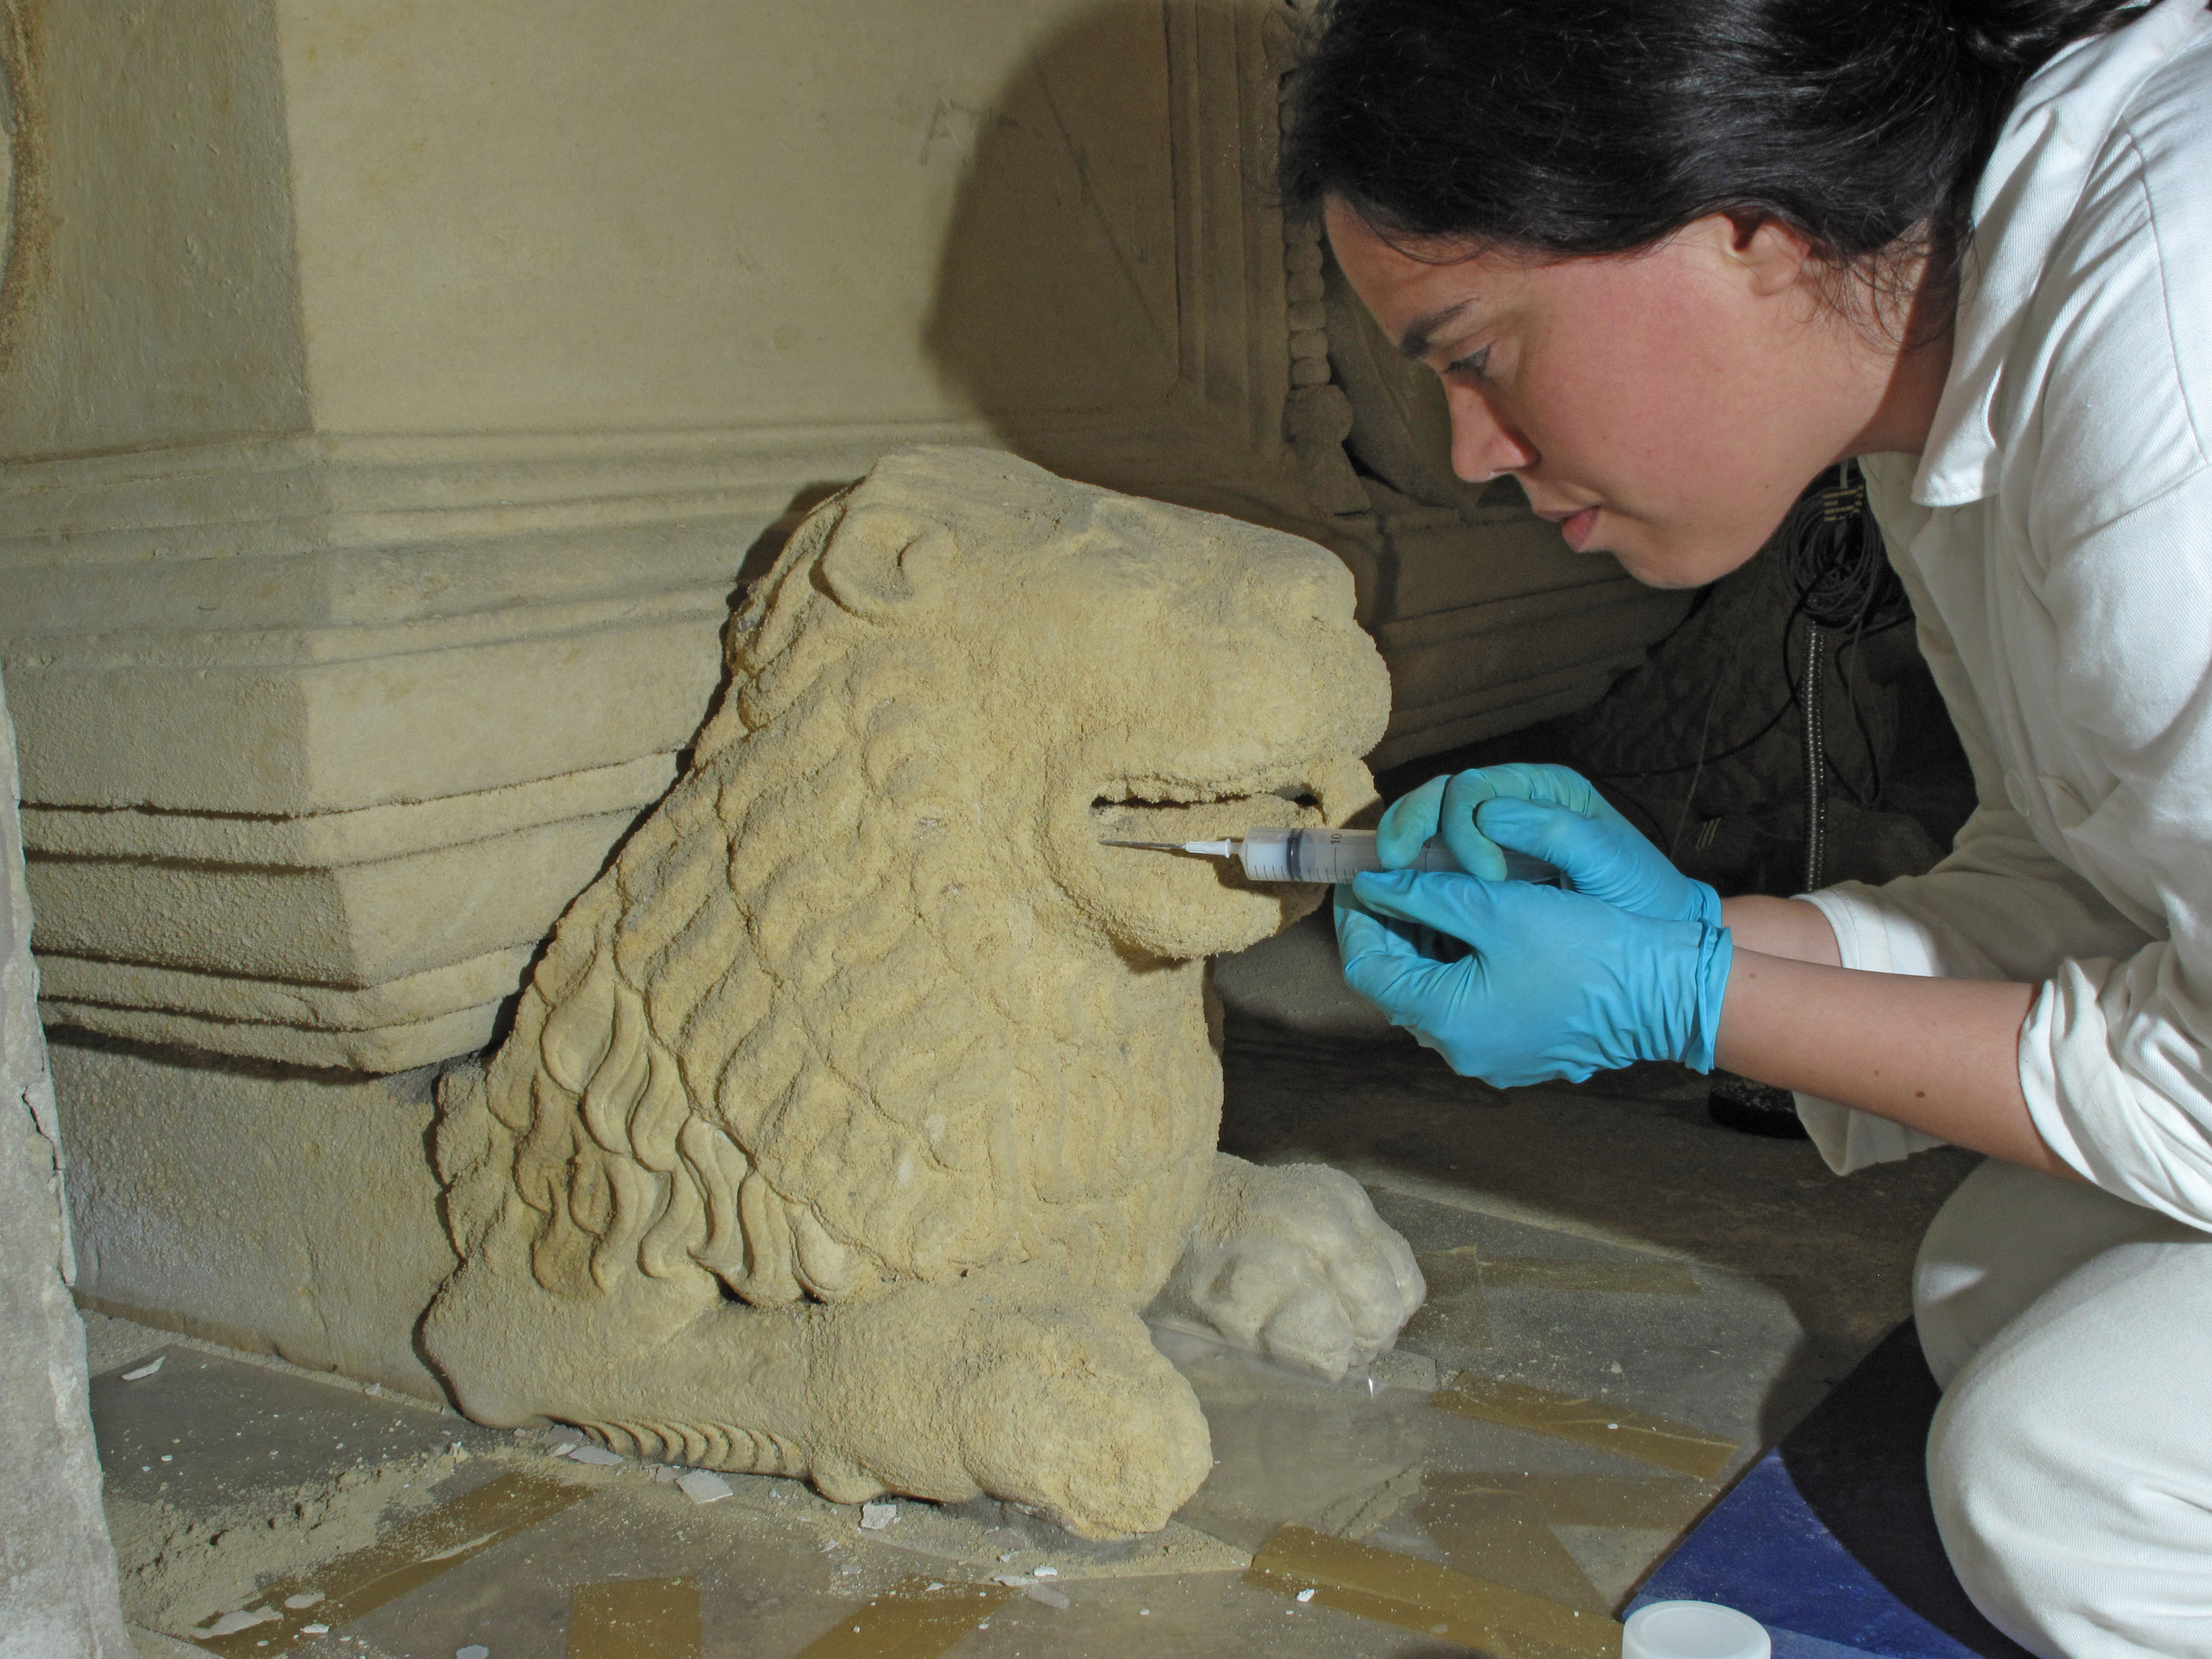  A consolidant was applied to the powdering limestone tomb monuments by syringe and needle.&nbsp;  Image © Courtauld CWPD 